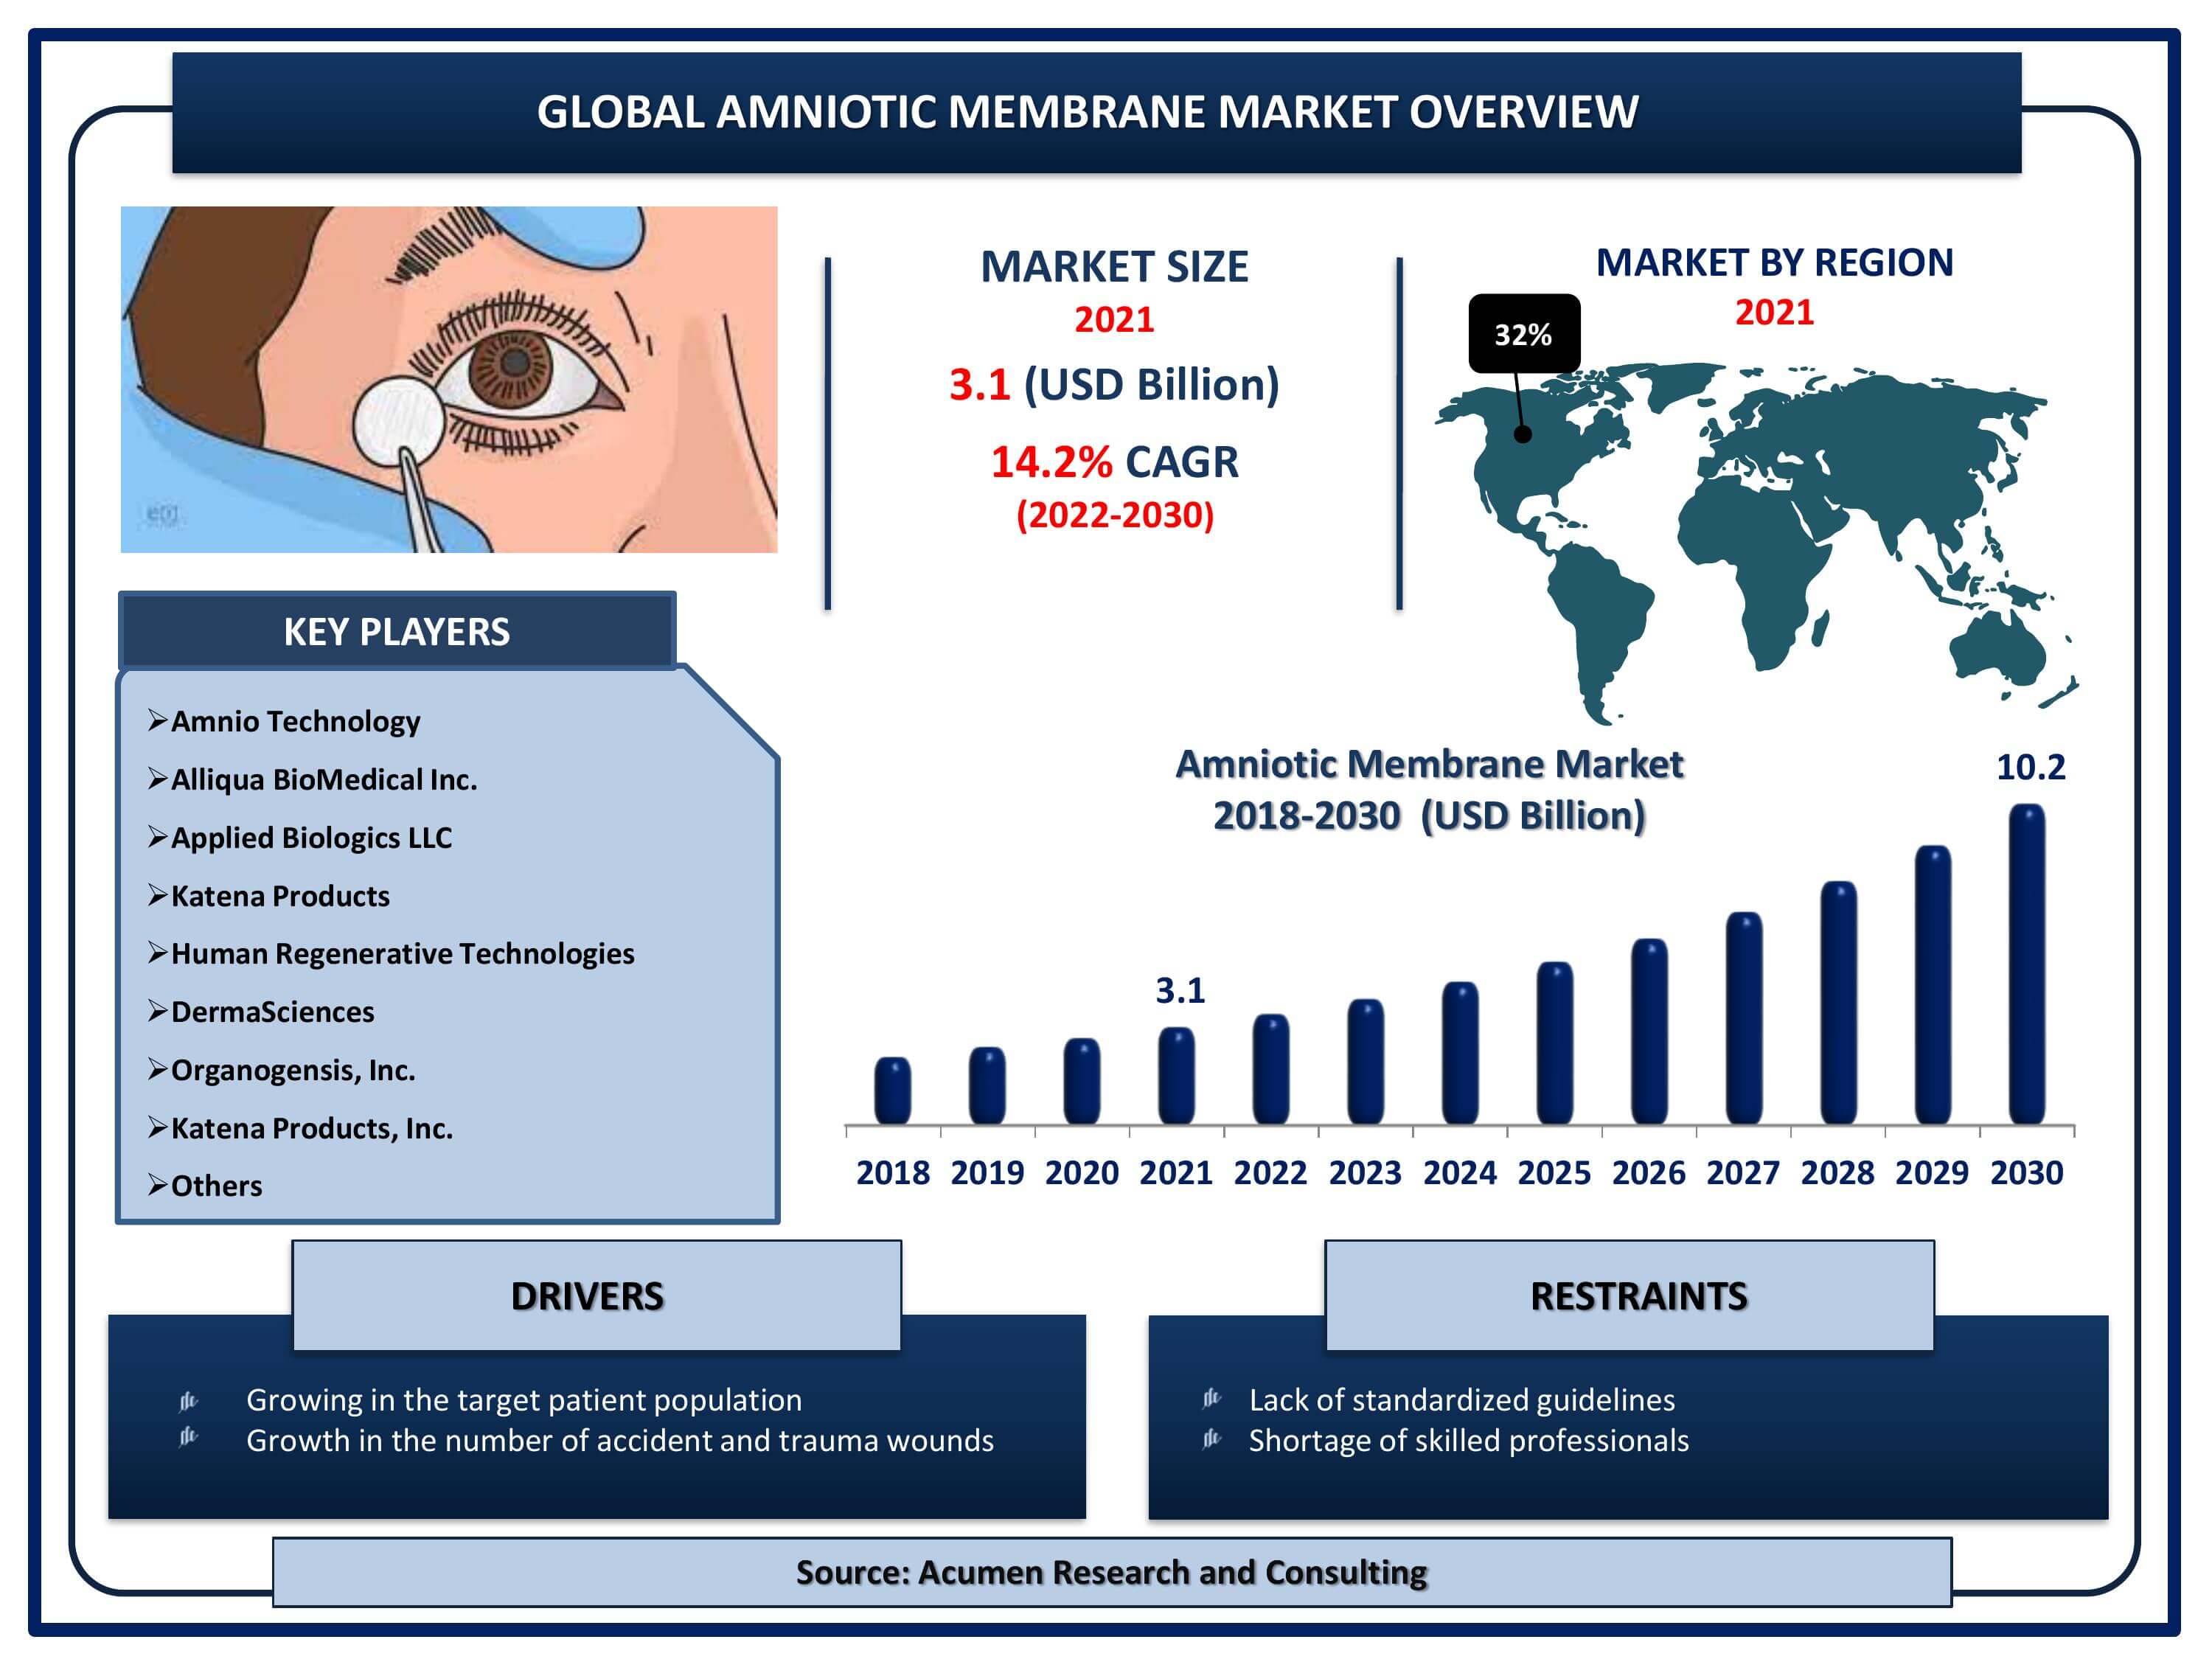 Global amniotic membrane market revenue is estimated to reach USD 10.2 Billion by 2030 with a CAGR of 14.2% from 2022 to 2030